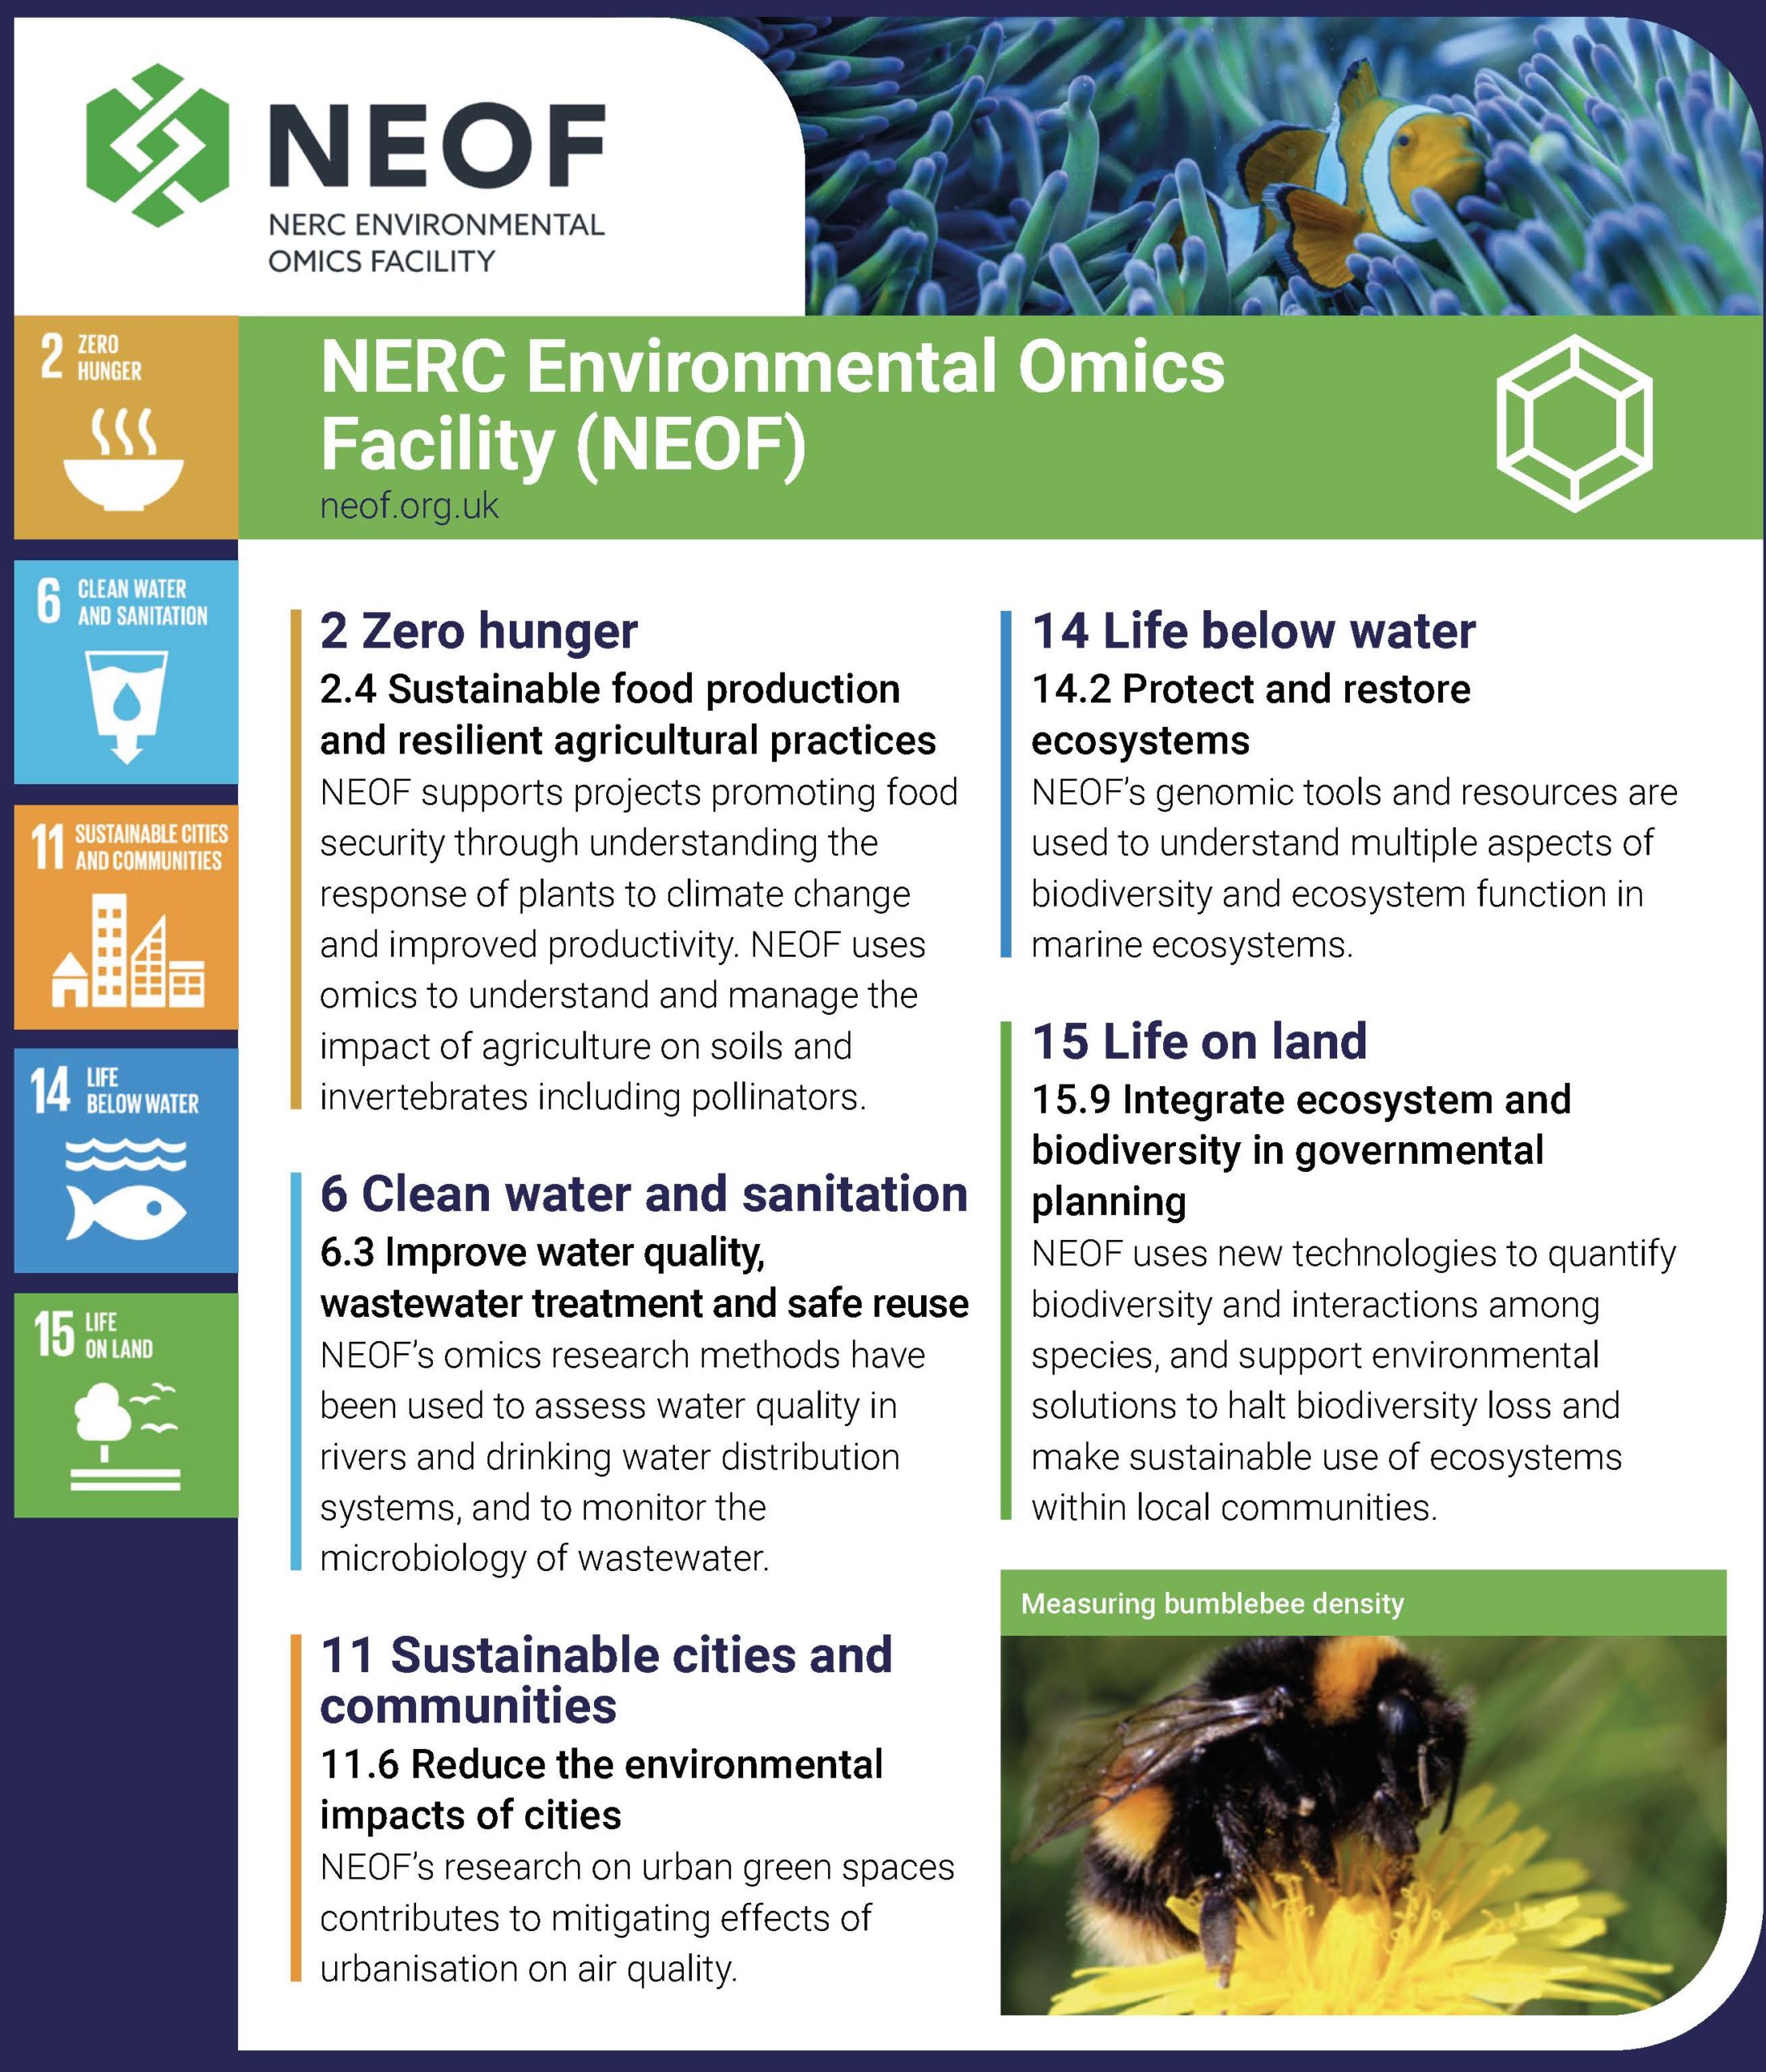 NEOF contribution towards the United Nations' Global Goals for Sustainable Development